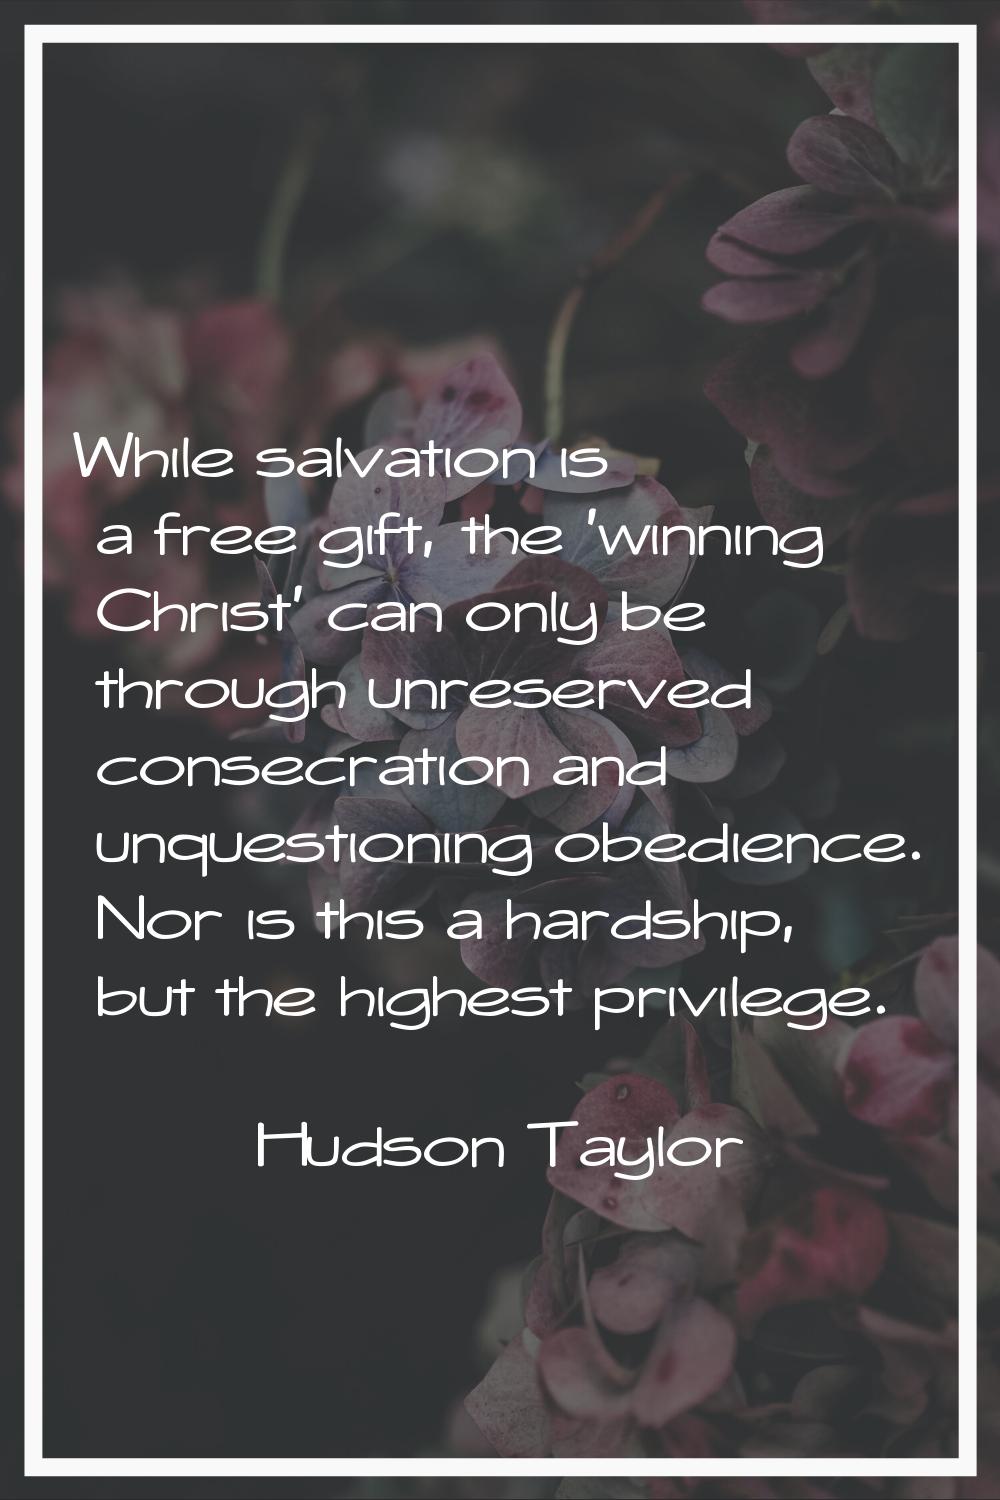 While salvation is a free gift, the 'winning Christ' can only be through unreserved consecration an